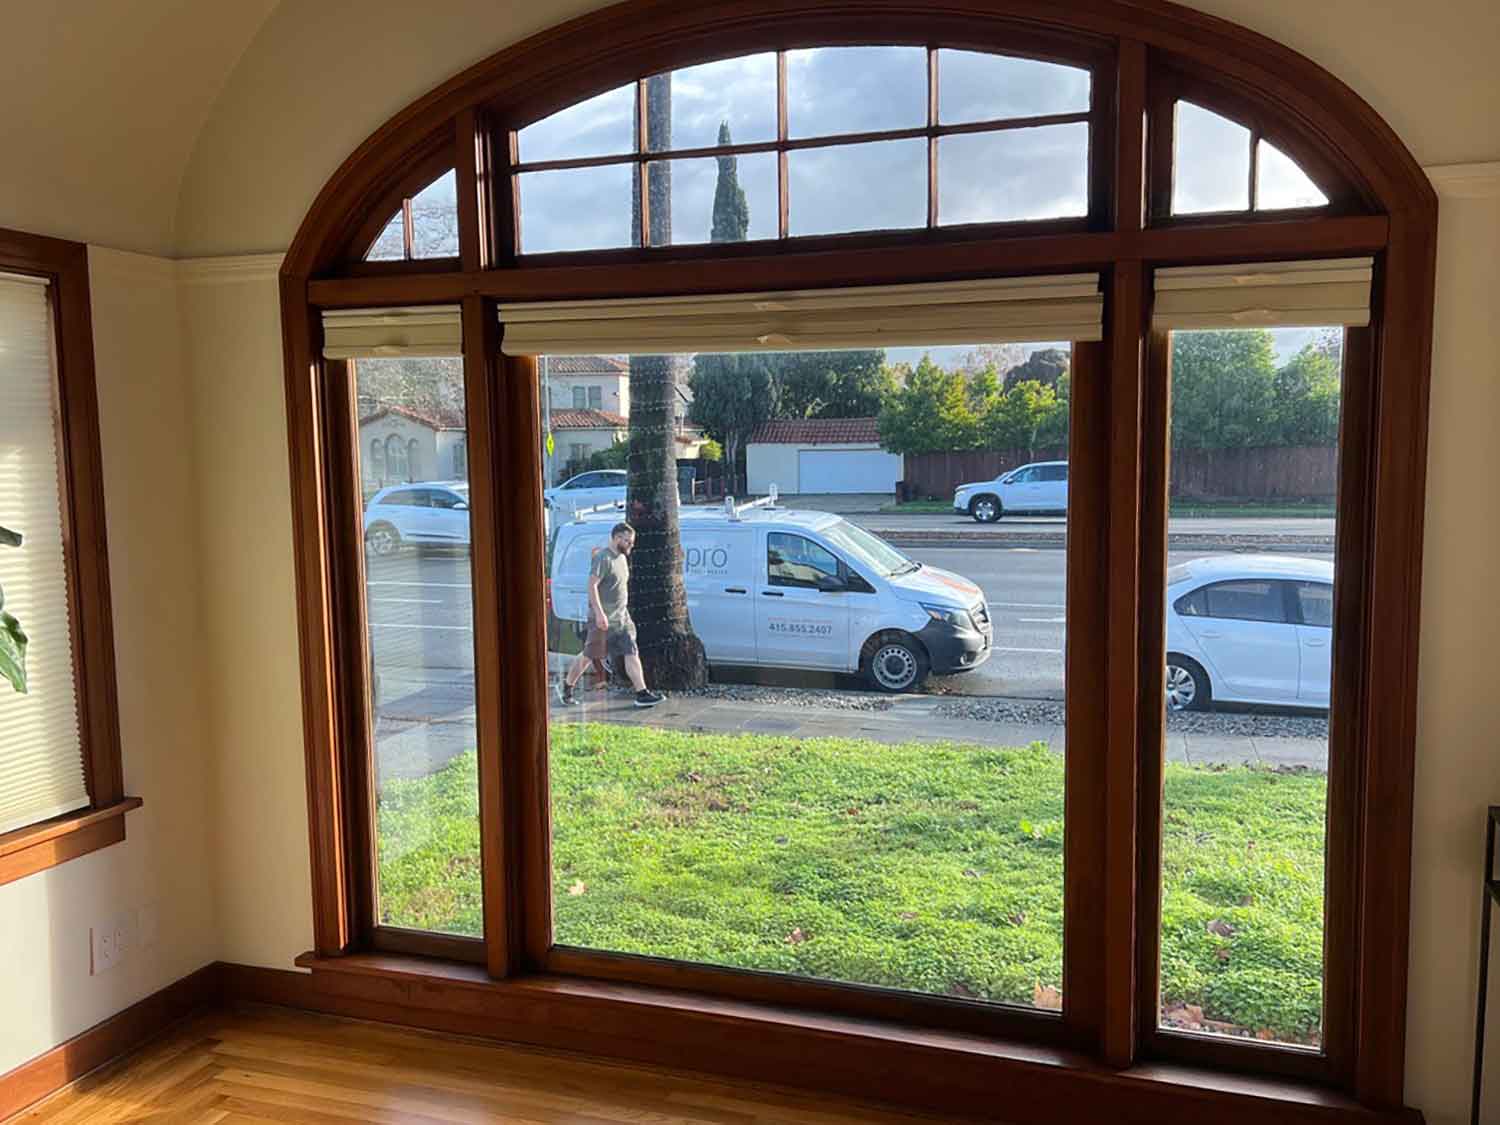 ClimatePro Installs 3M Sun Control Window Tint in San Jose, CA. Get a free estimate from the Bay Area's best window film company.